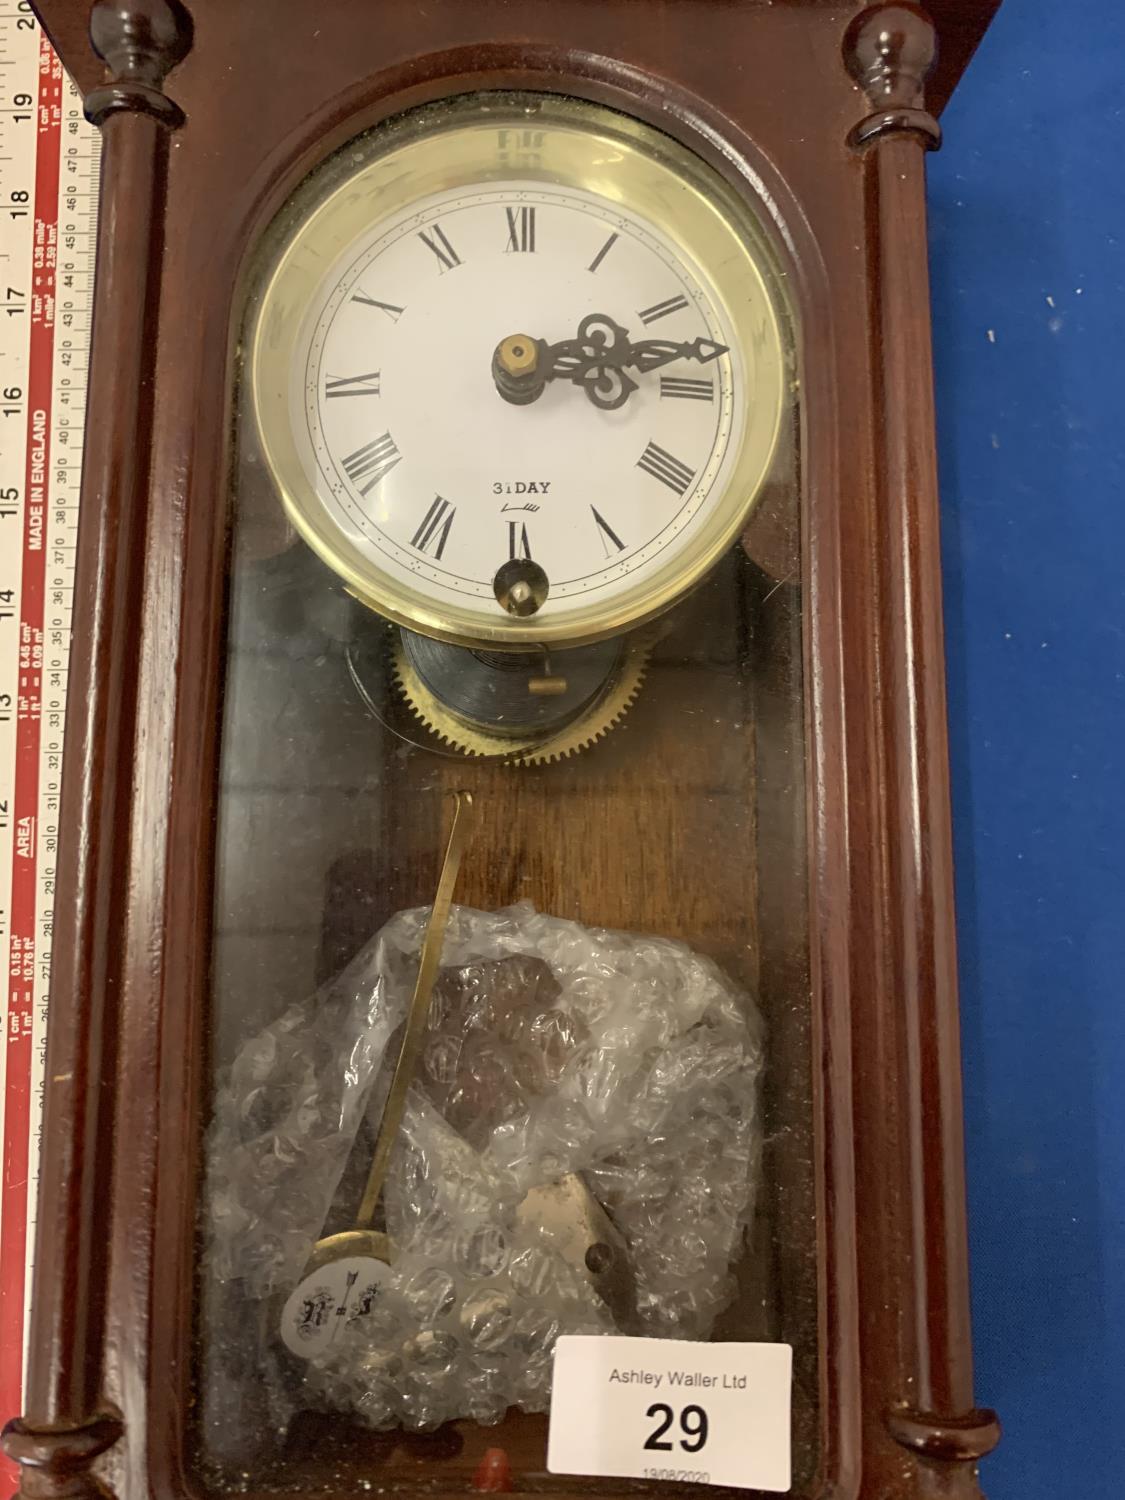 A 31 DAY WALL CLOCK WITH PENDULUM AND KEY - Image 2 of 3